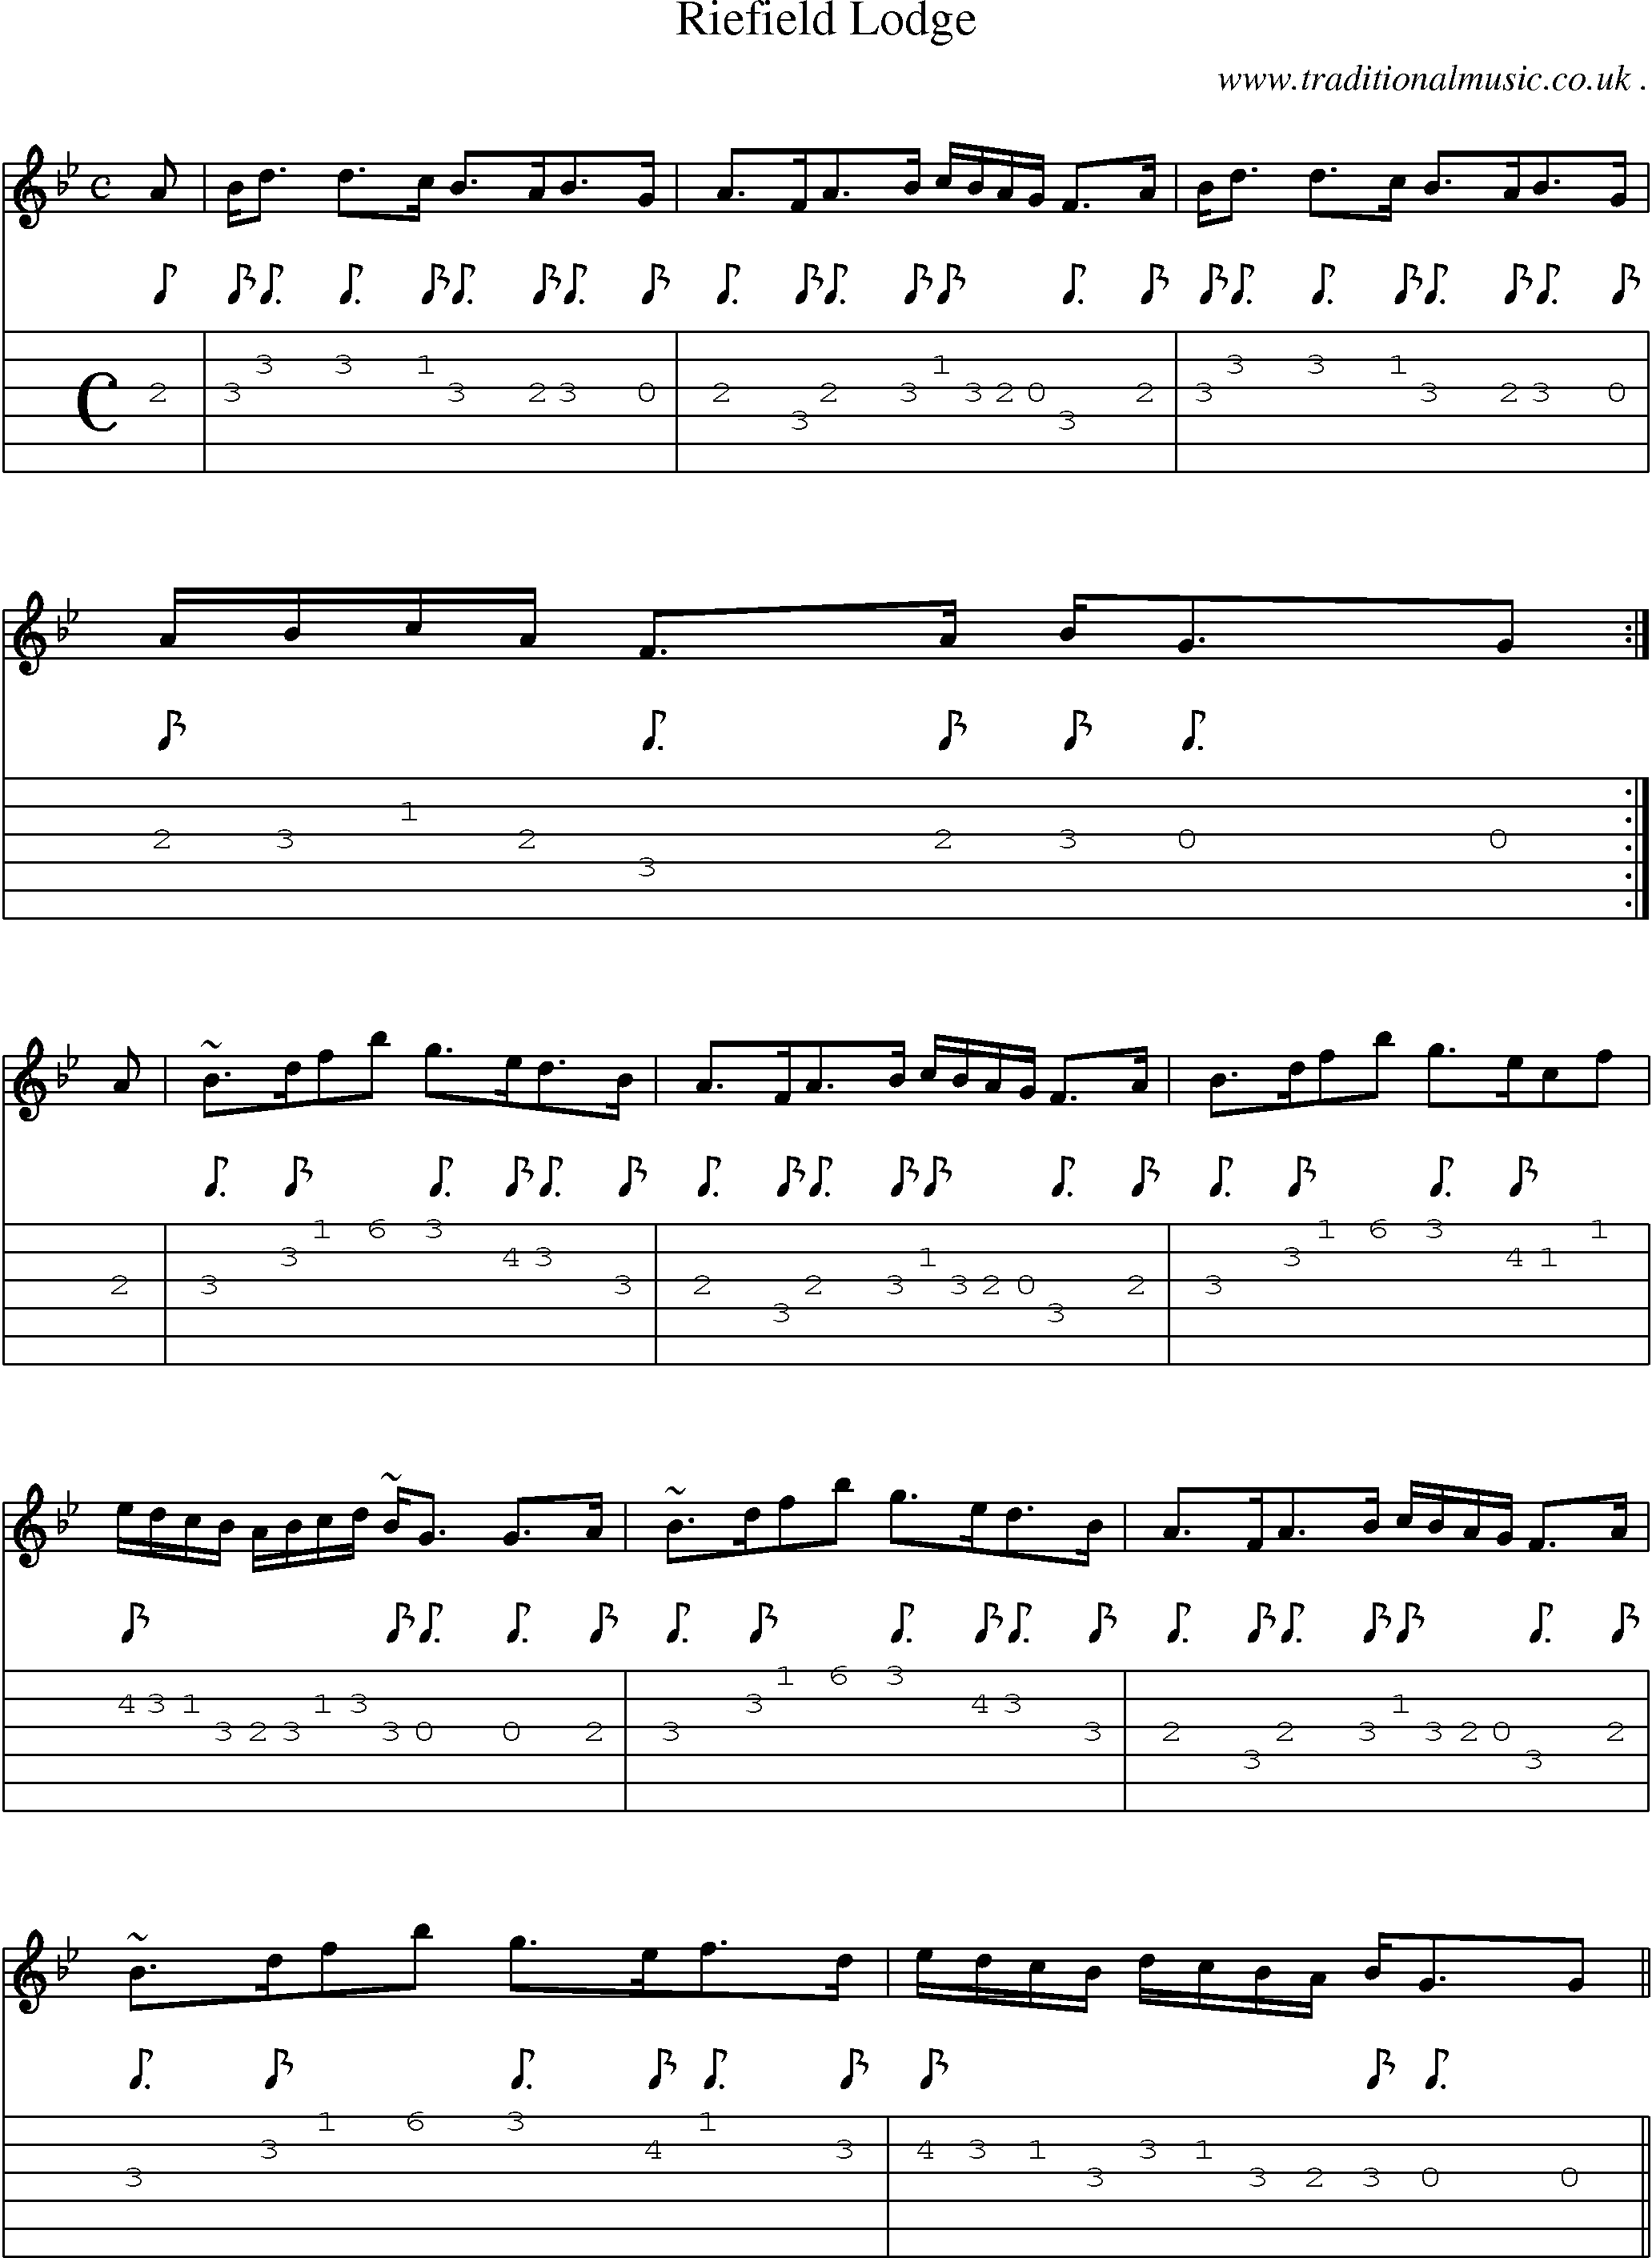 Sheet-music  score, Chords and Guitar Tabs for Riefield Lodge